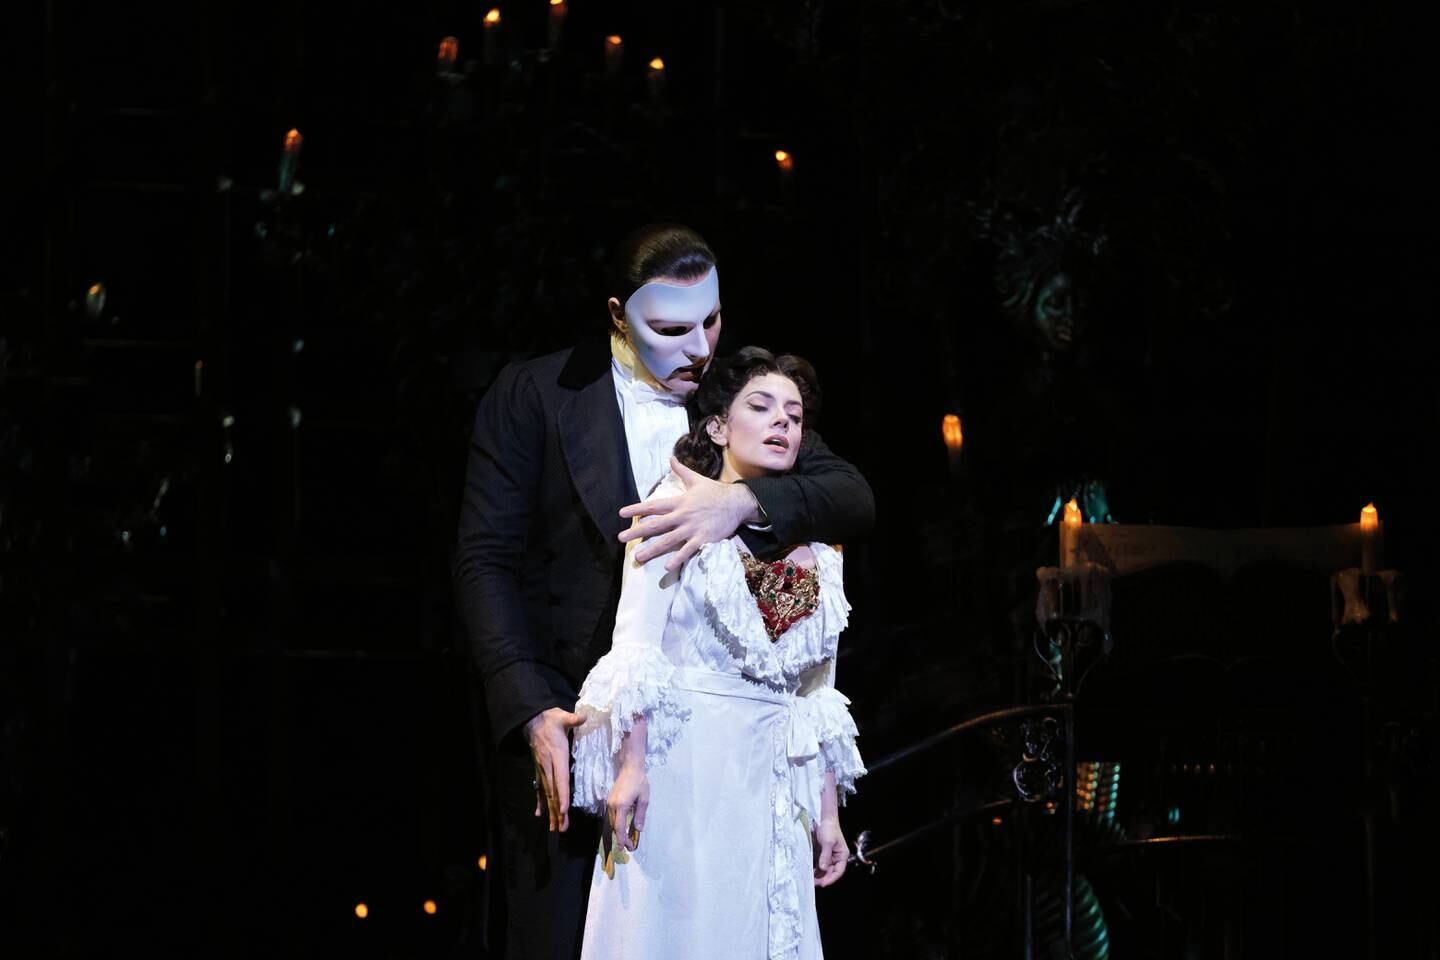 'Phantom of the Opera' is based on the stormy relationship between the title character and his protege Christine Daae. Photo: Dubai Opera